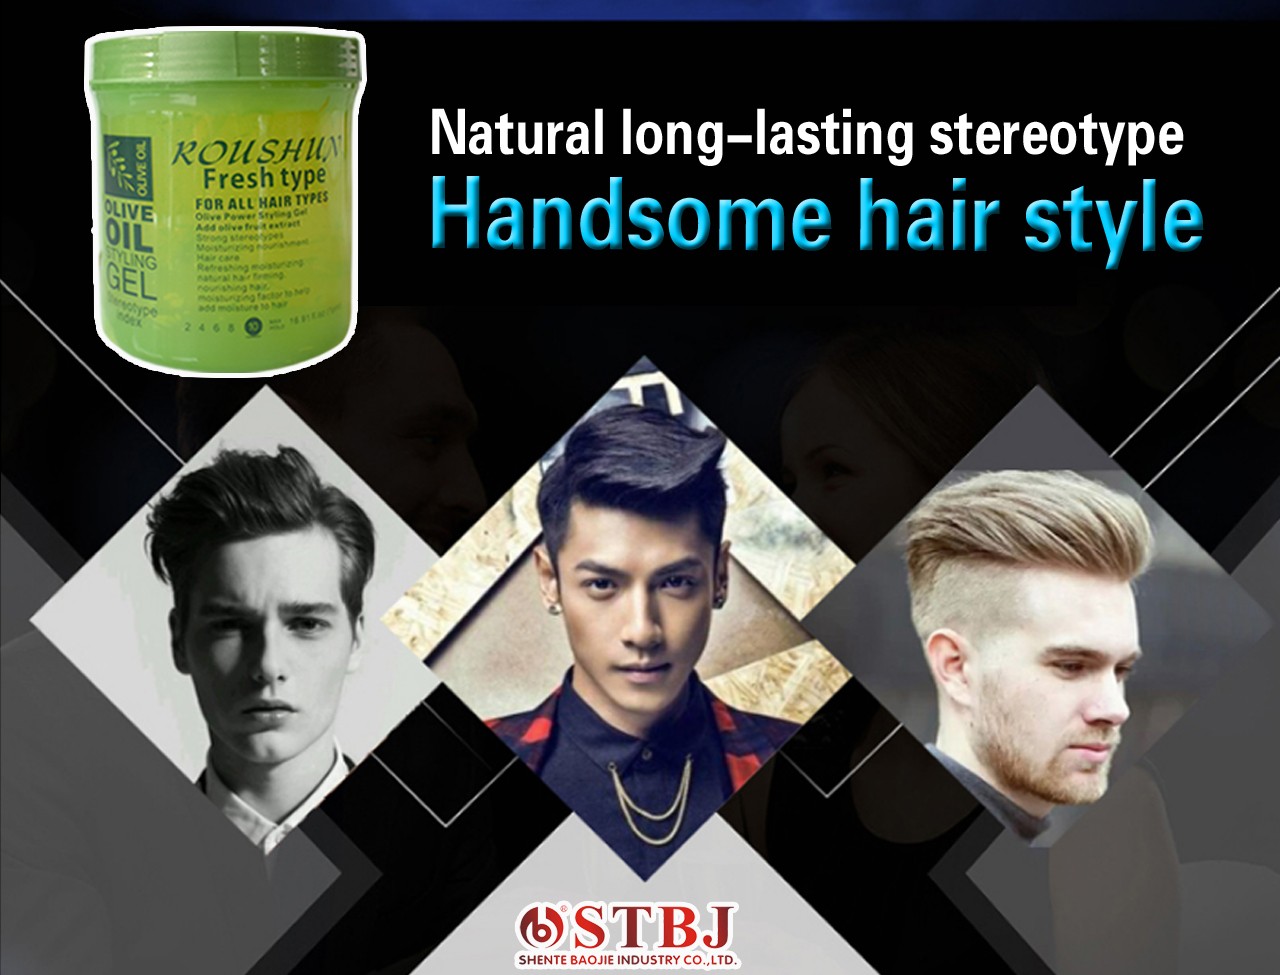 Roushun natural long-lasting olive powerful styling gel